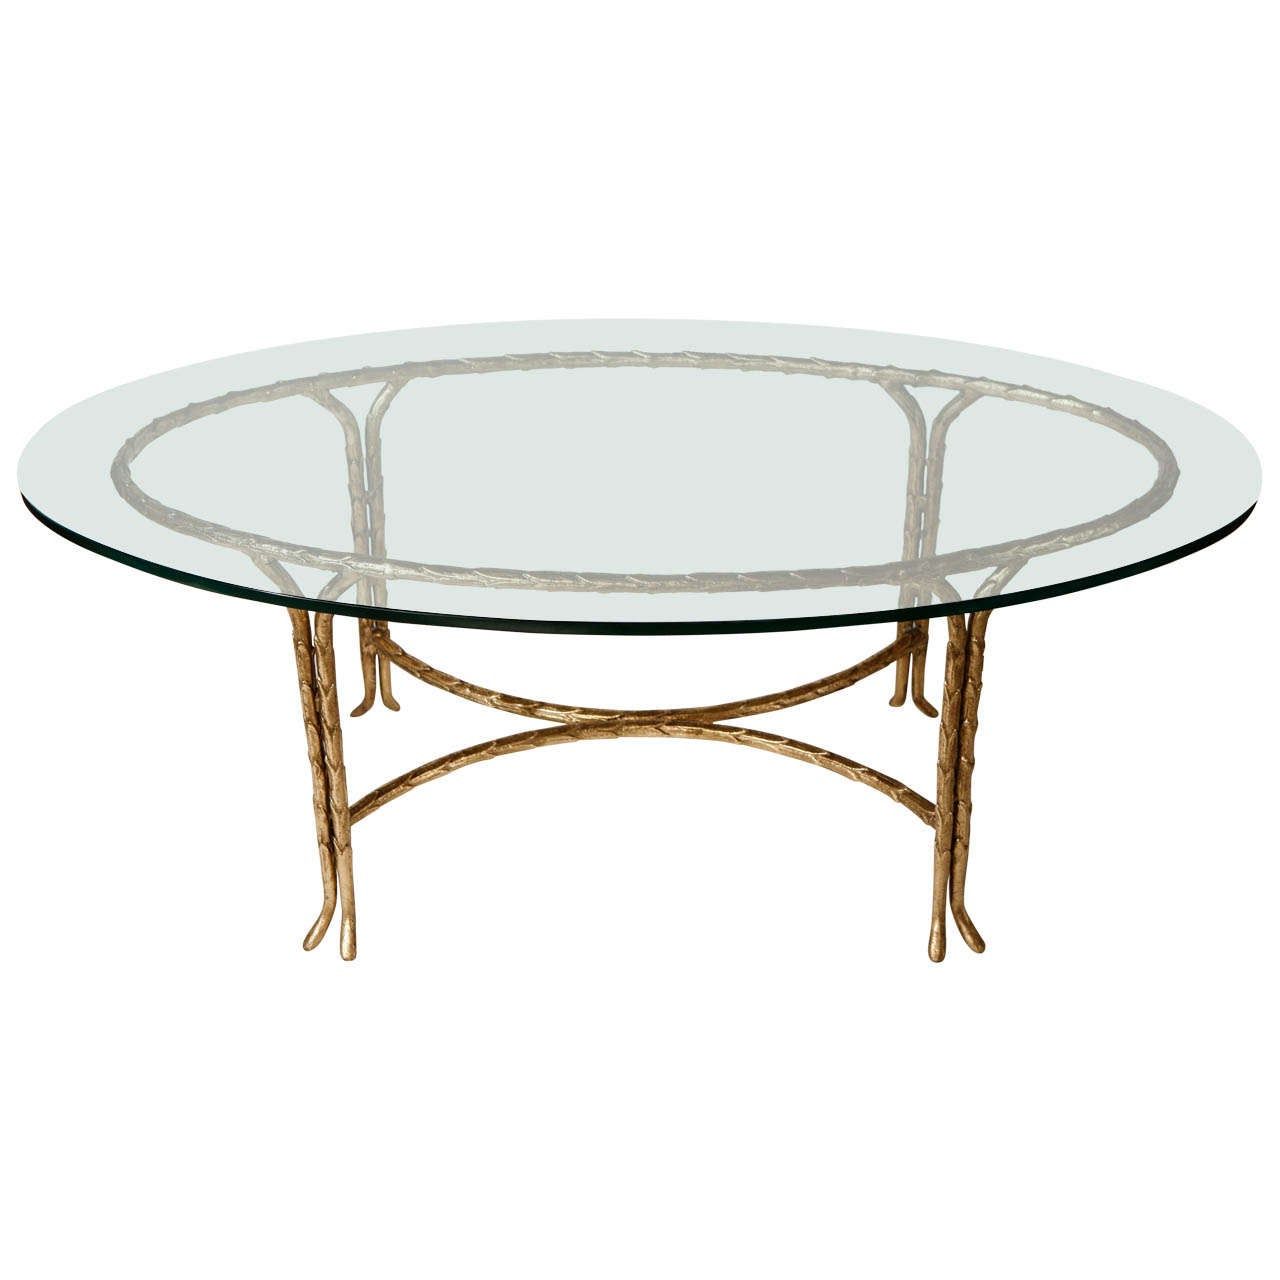 Fashionable Gold Leafed Maison Bagues Oval Coffee Table At 1stdibs Pertaining To Glass And Gold Oval Coffee Tables (View 3 of 10)